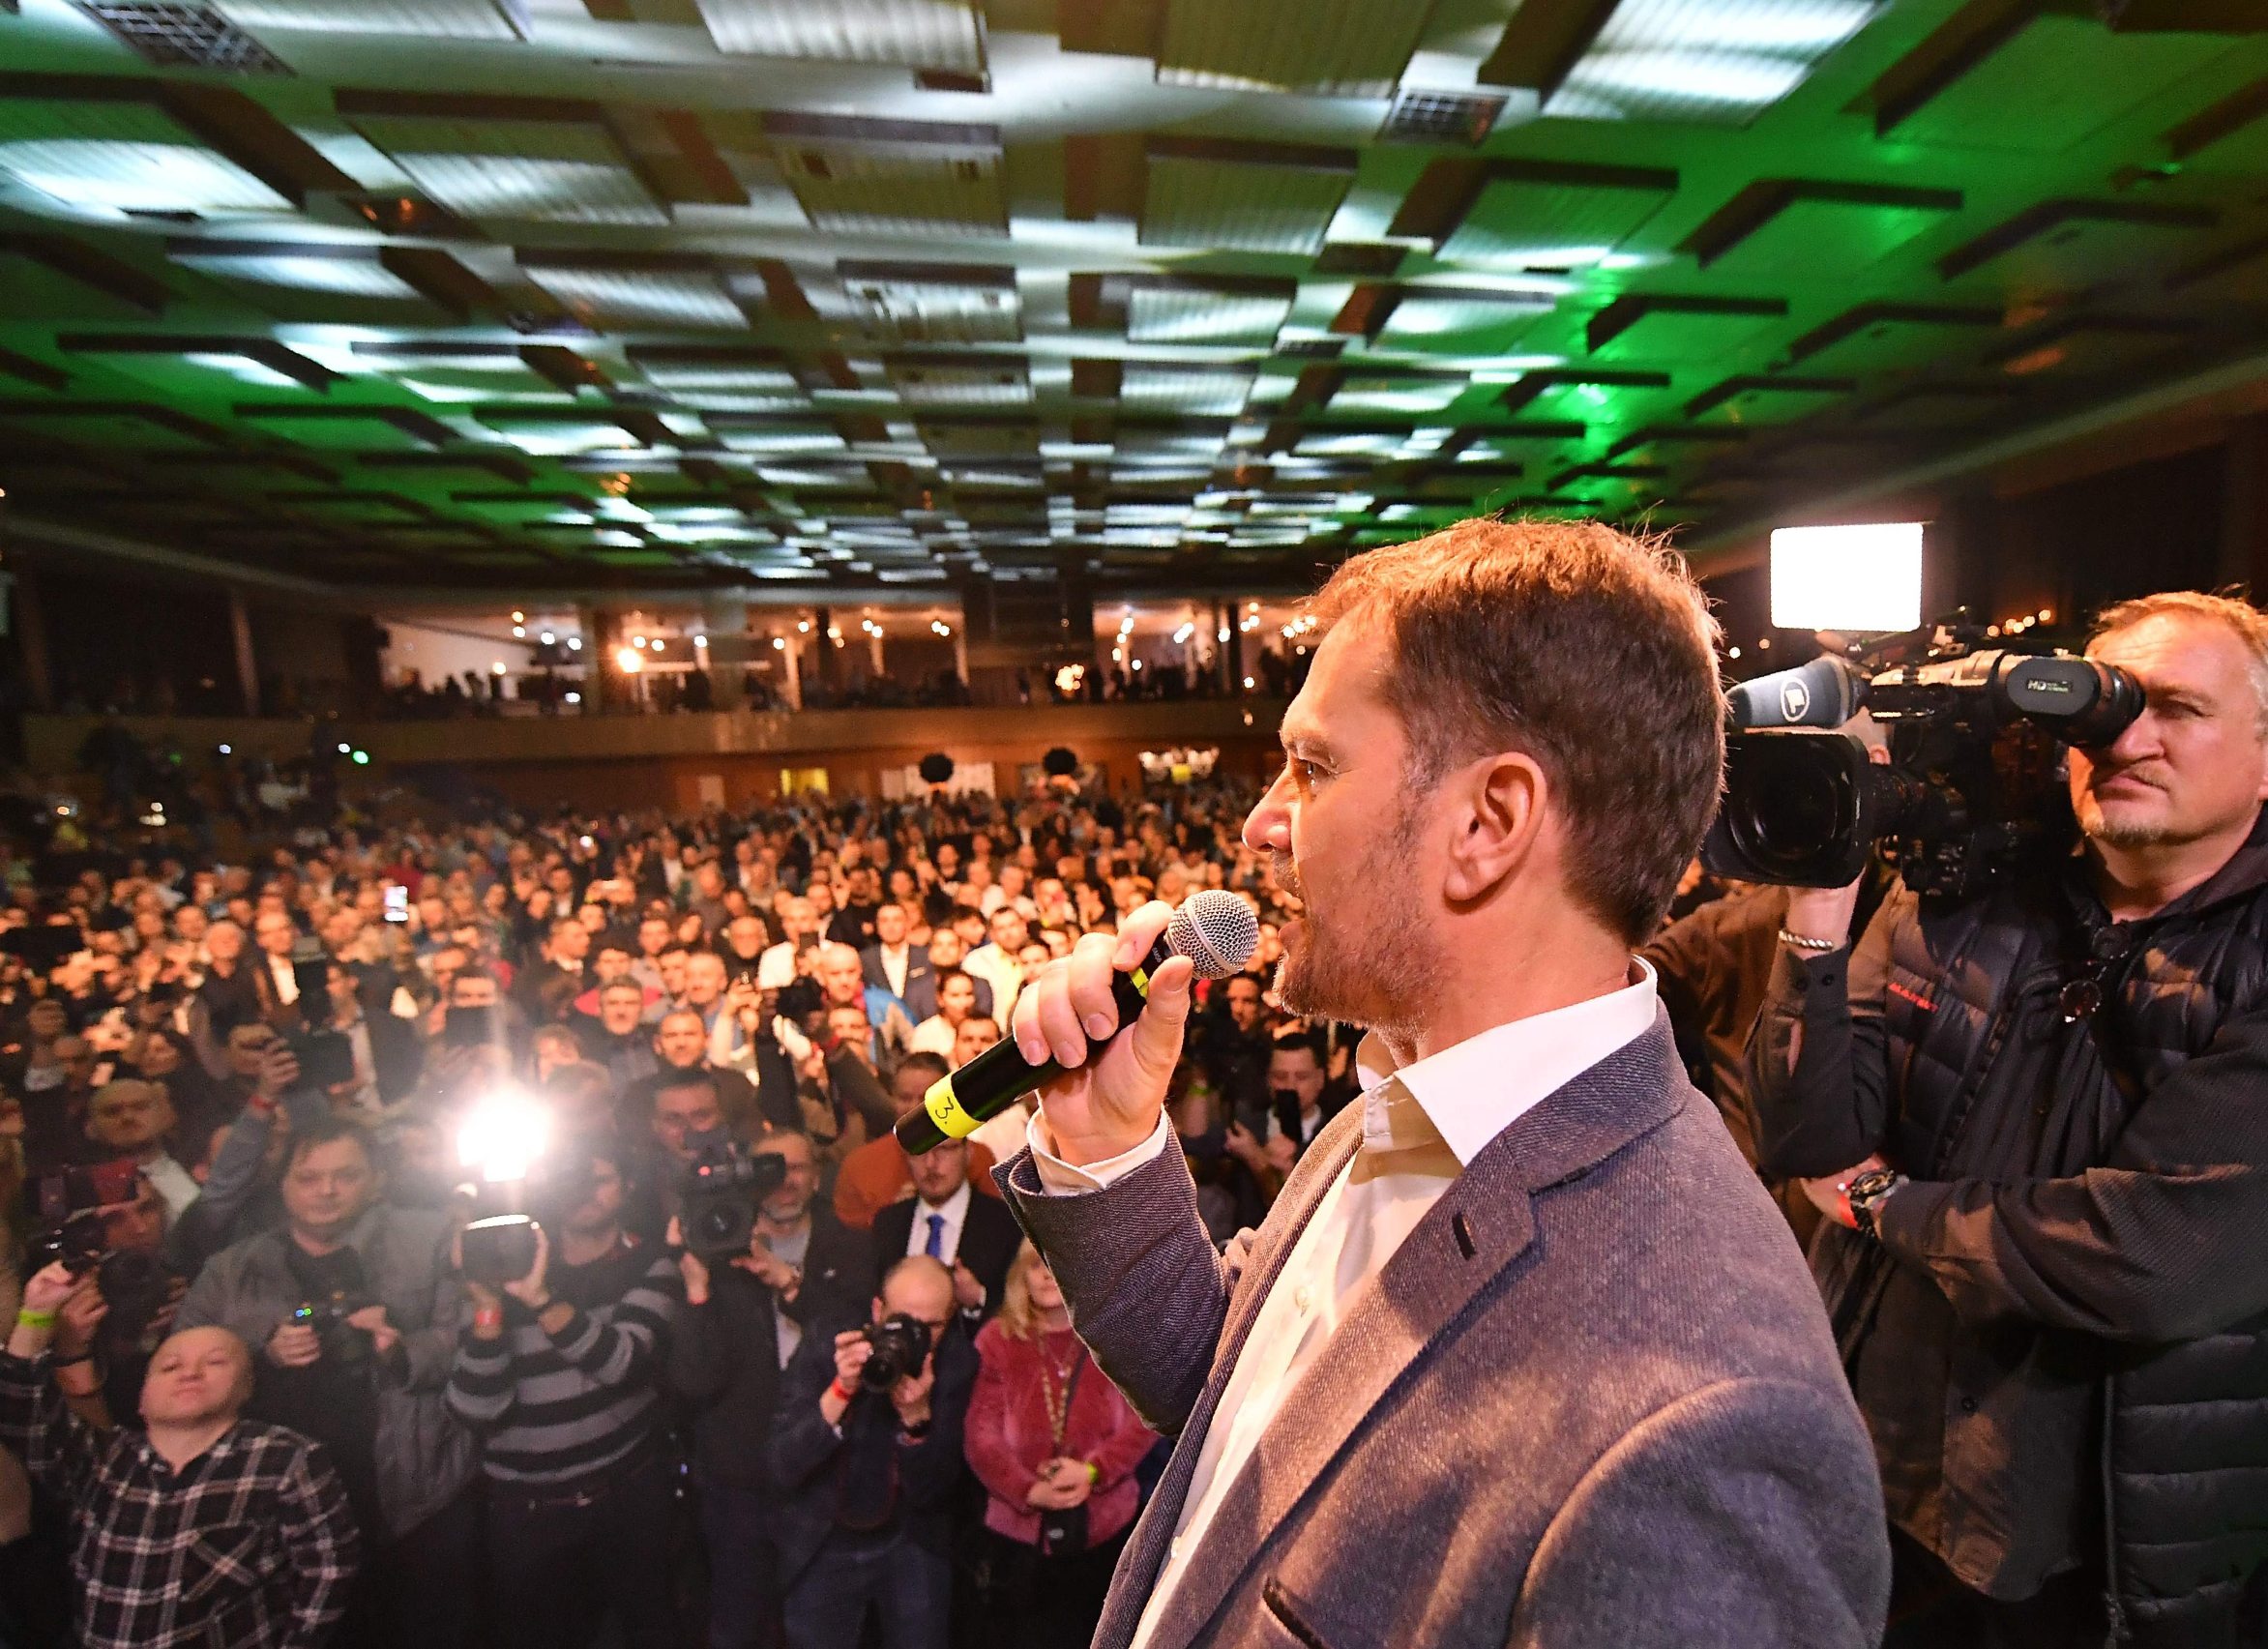 Igor Matovic, leader of the anti-graft political movement Ordinary People and Independent Personalities (OLaNO), speaks to supporters during the party's parliamentary election evening in Trnava, Slovakia on February 29, 2020. - Slovak voters handed a resounding victory to the centre-right, anti-graft OLaNO opposition party in Saturday's general election dominated by public anger over the 2018 murder of a journalist probing corruption, according to an exit poll. (Photo by JOE KLAMAR / AFP)